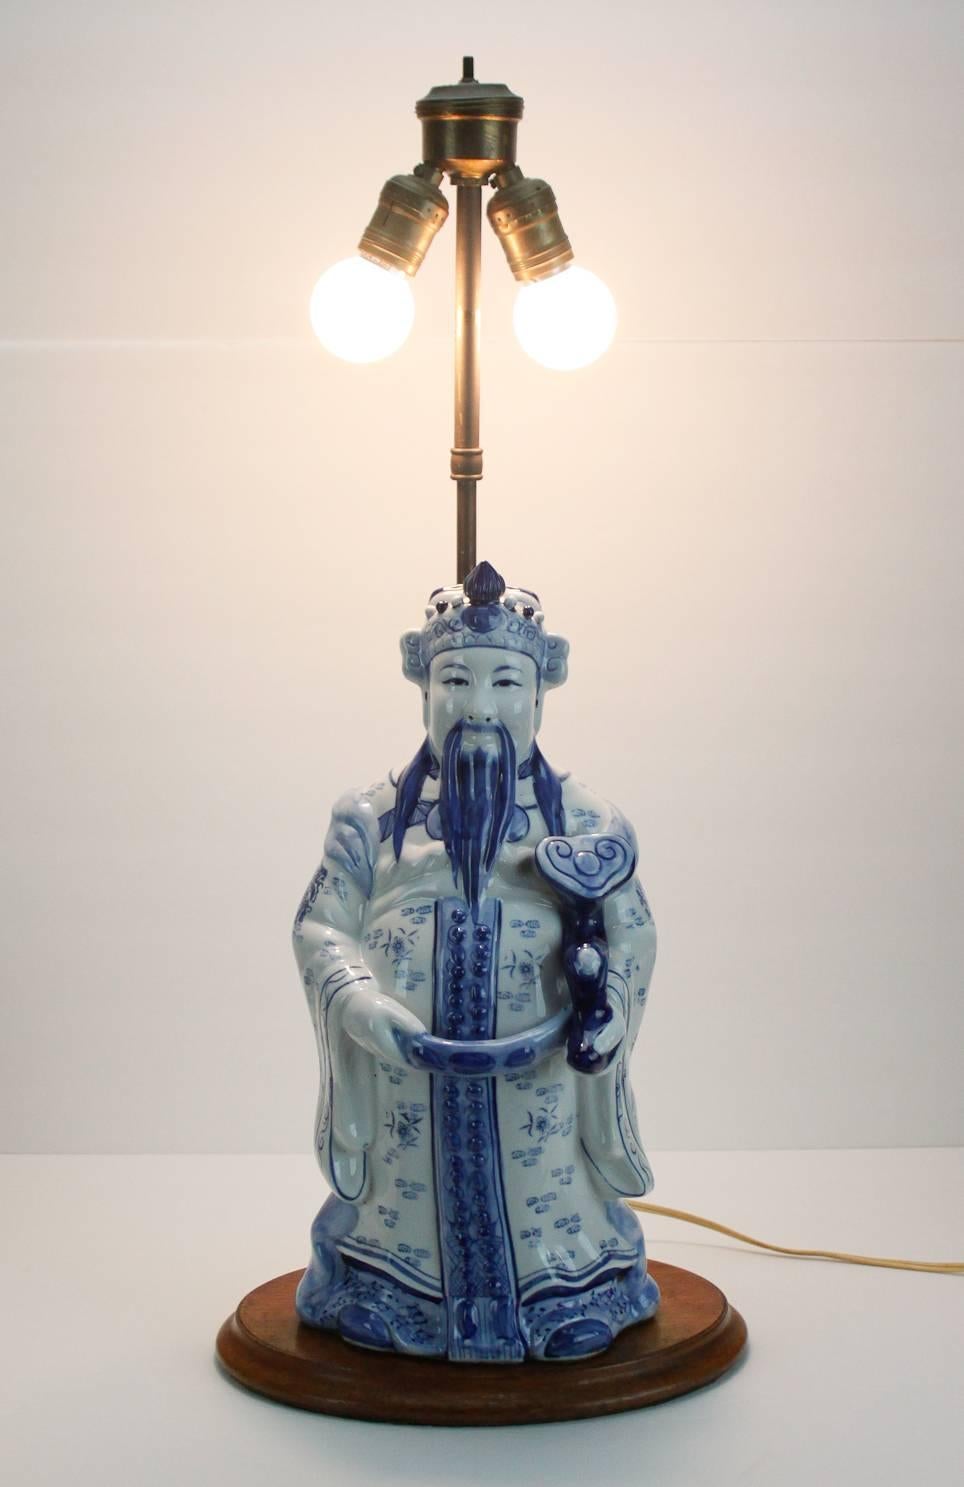 Vintage blue and white ceramic Chinese figural lamp. Lamp takes two light bulbs. In excellent vintage condition. Measures: Figure stands 16